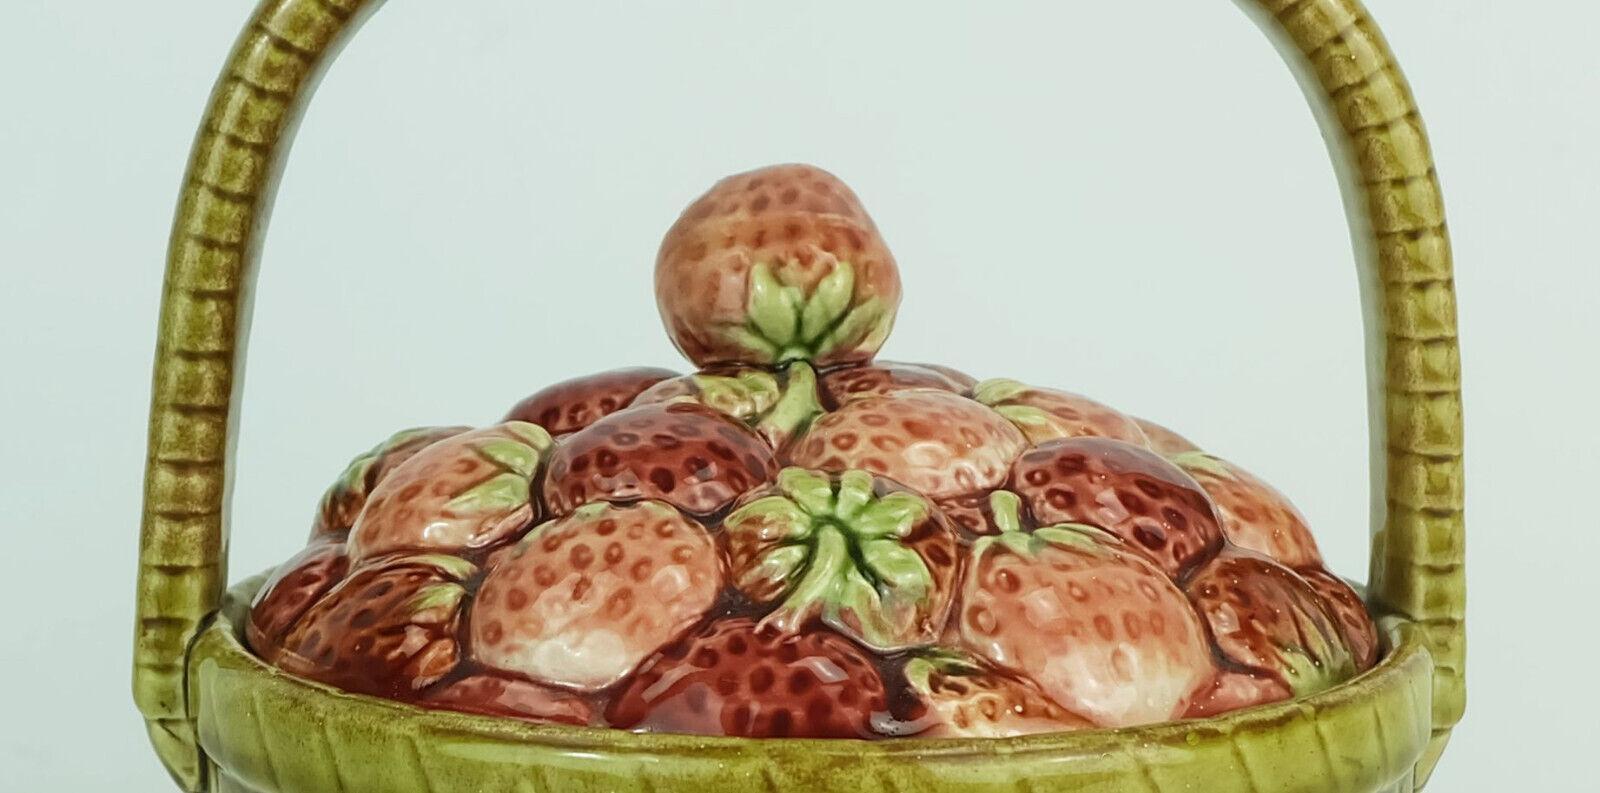 old french sarreguemines majolica JAR with lid 1920s ceramic cookie jar For Sale 2